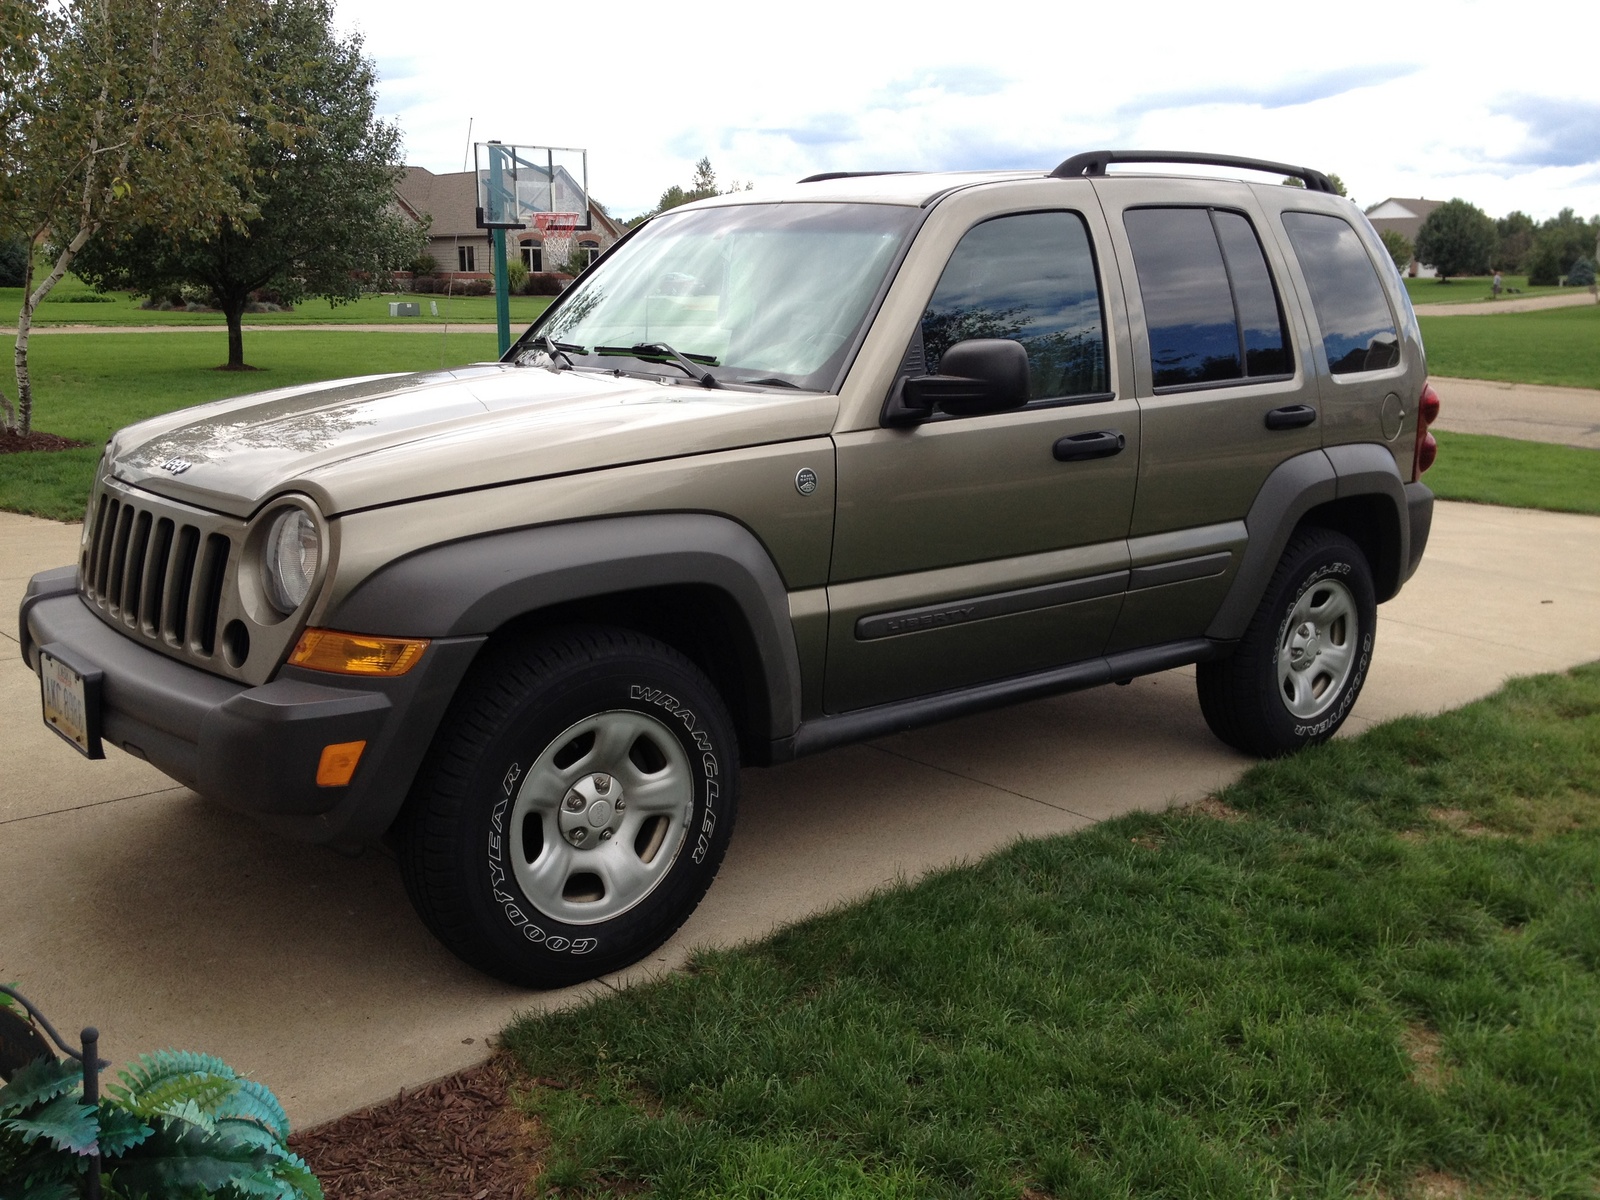 Reviews for jeep liberty 2007 #5